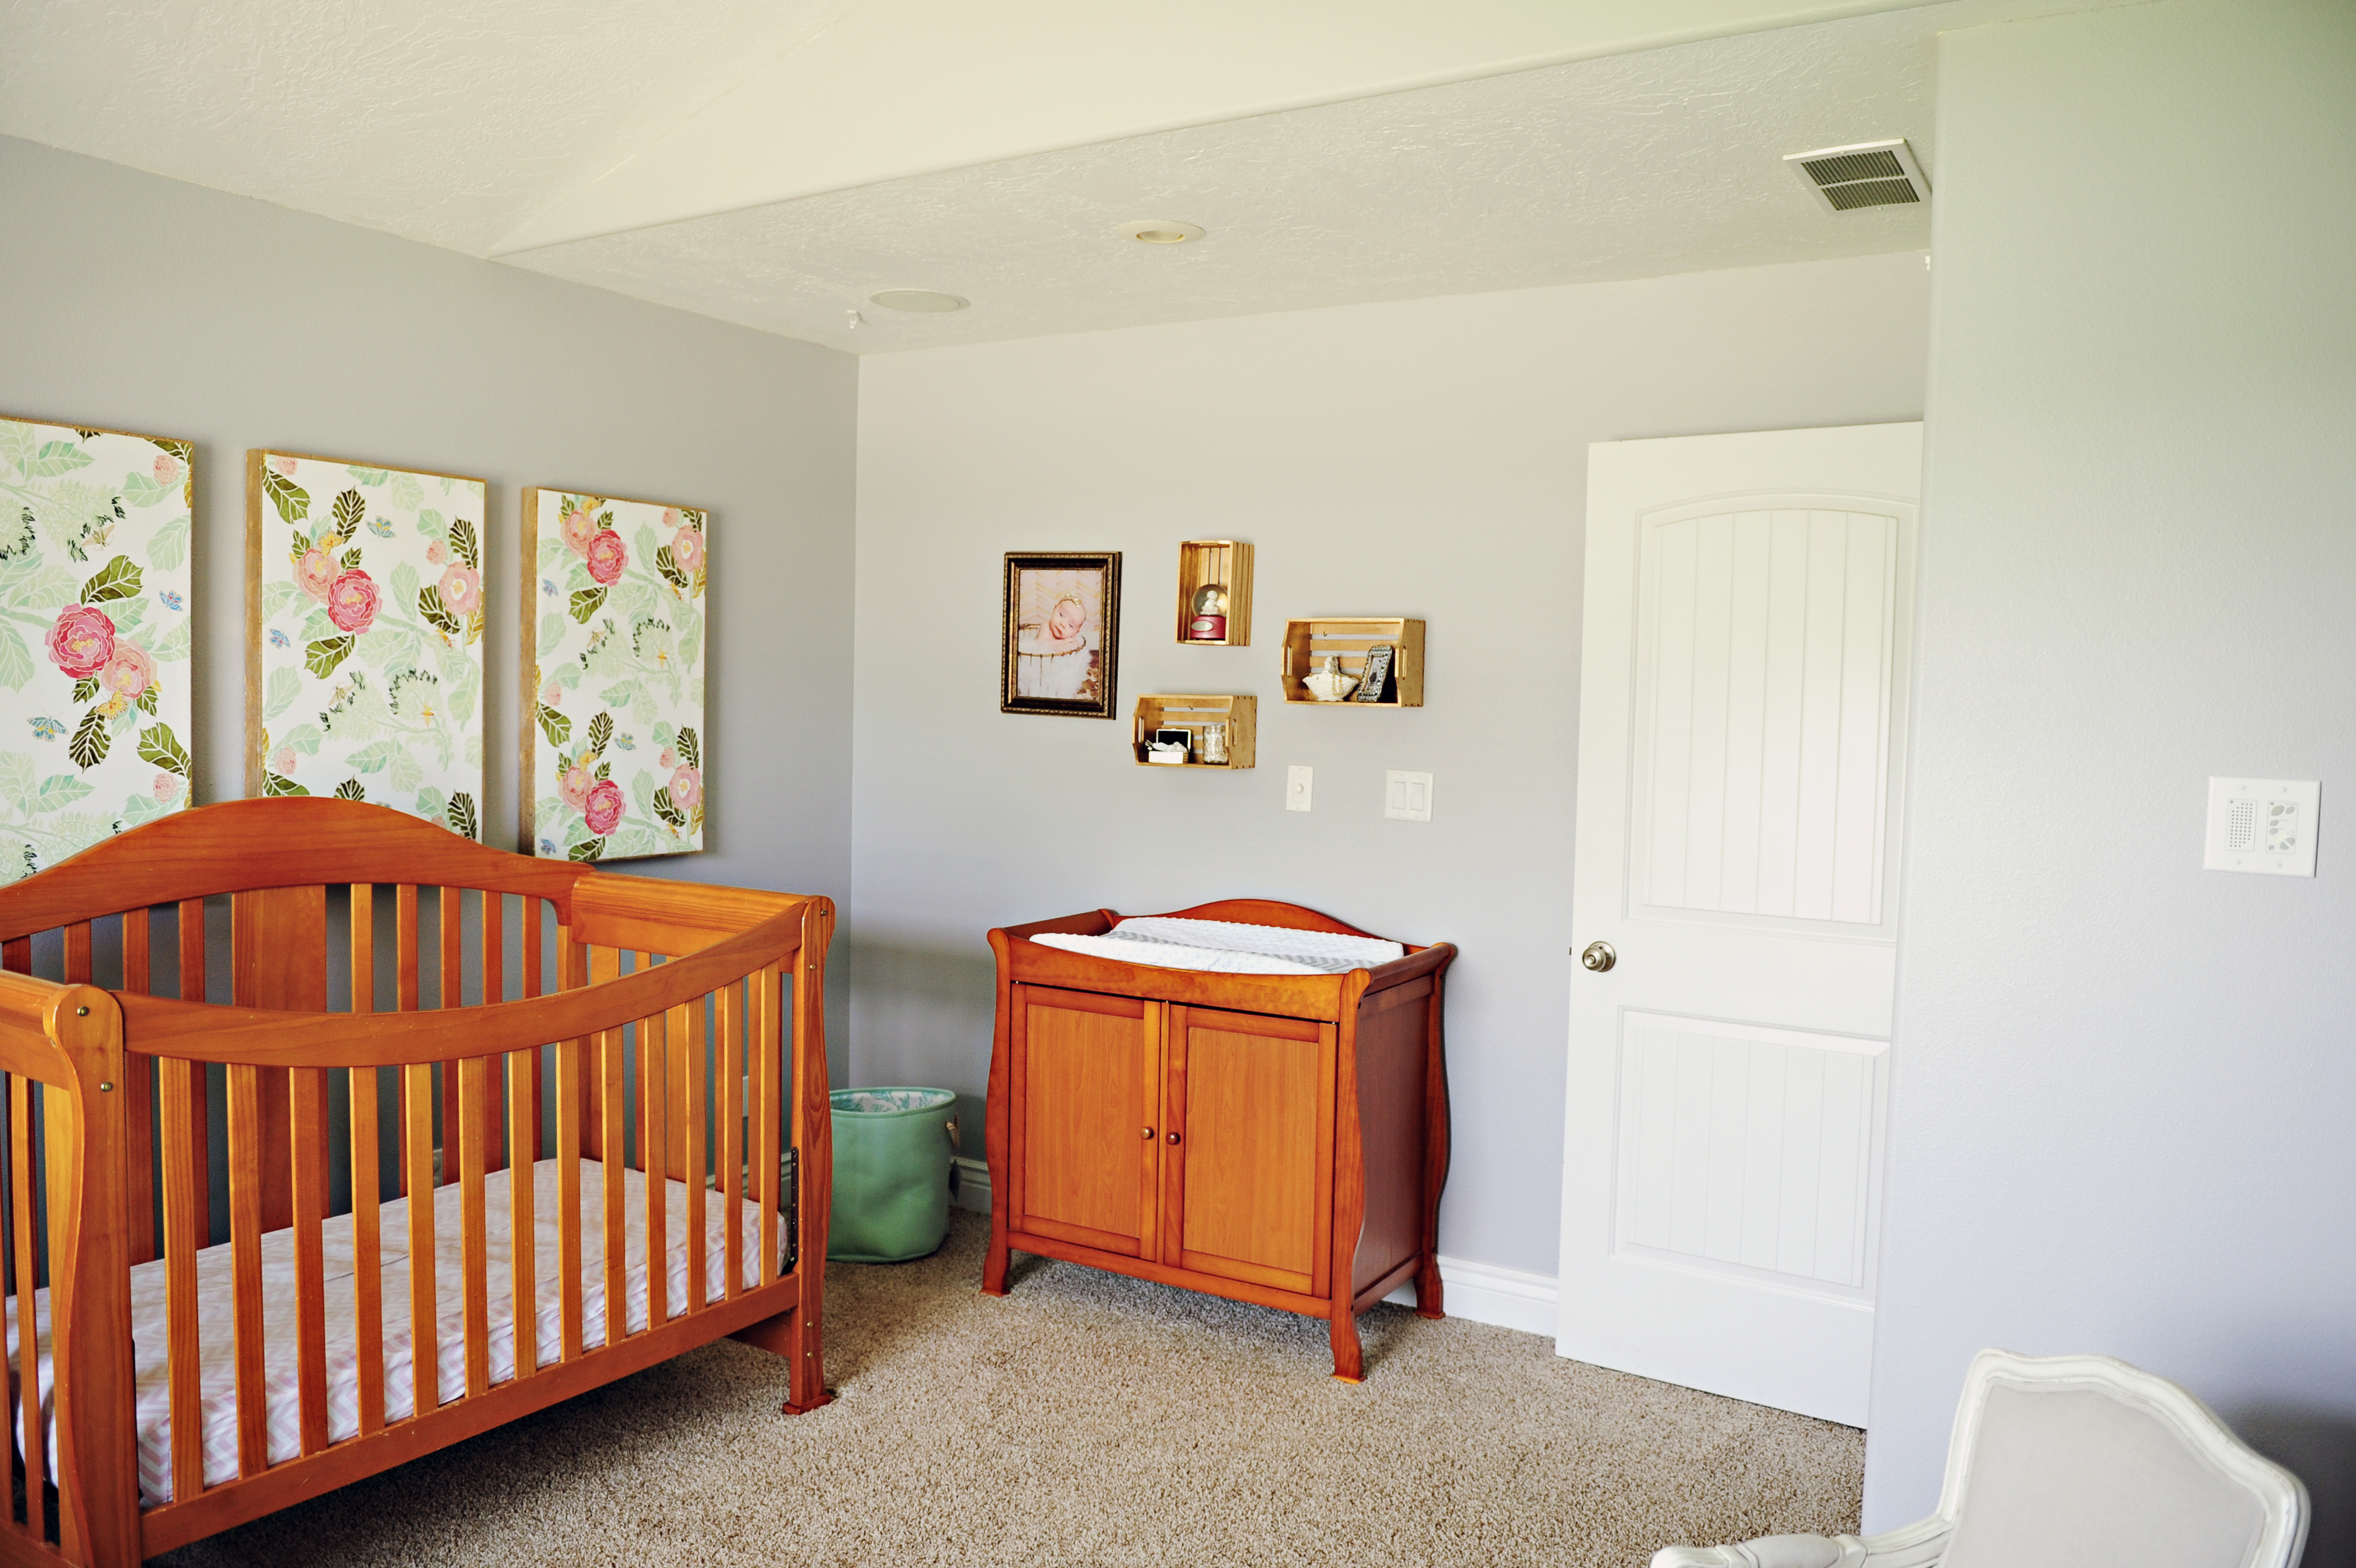 Maelee's Floral Print Nursery - One Small Child